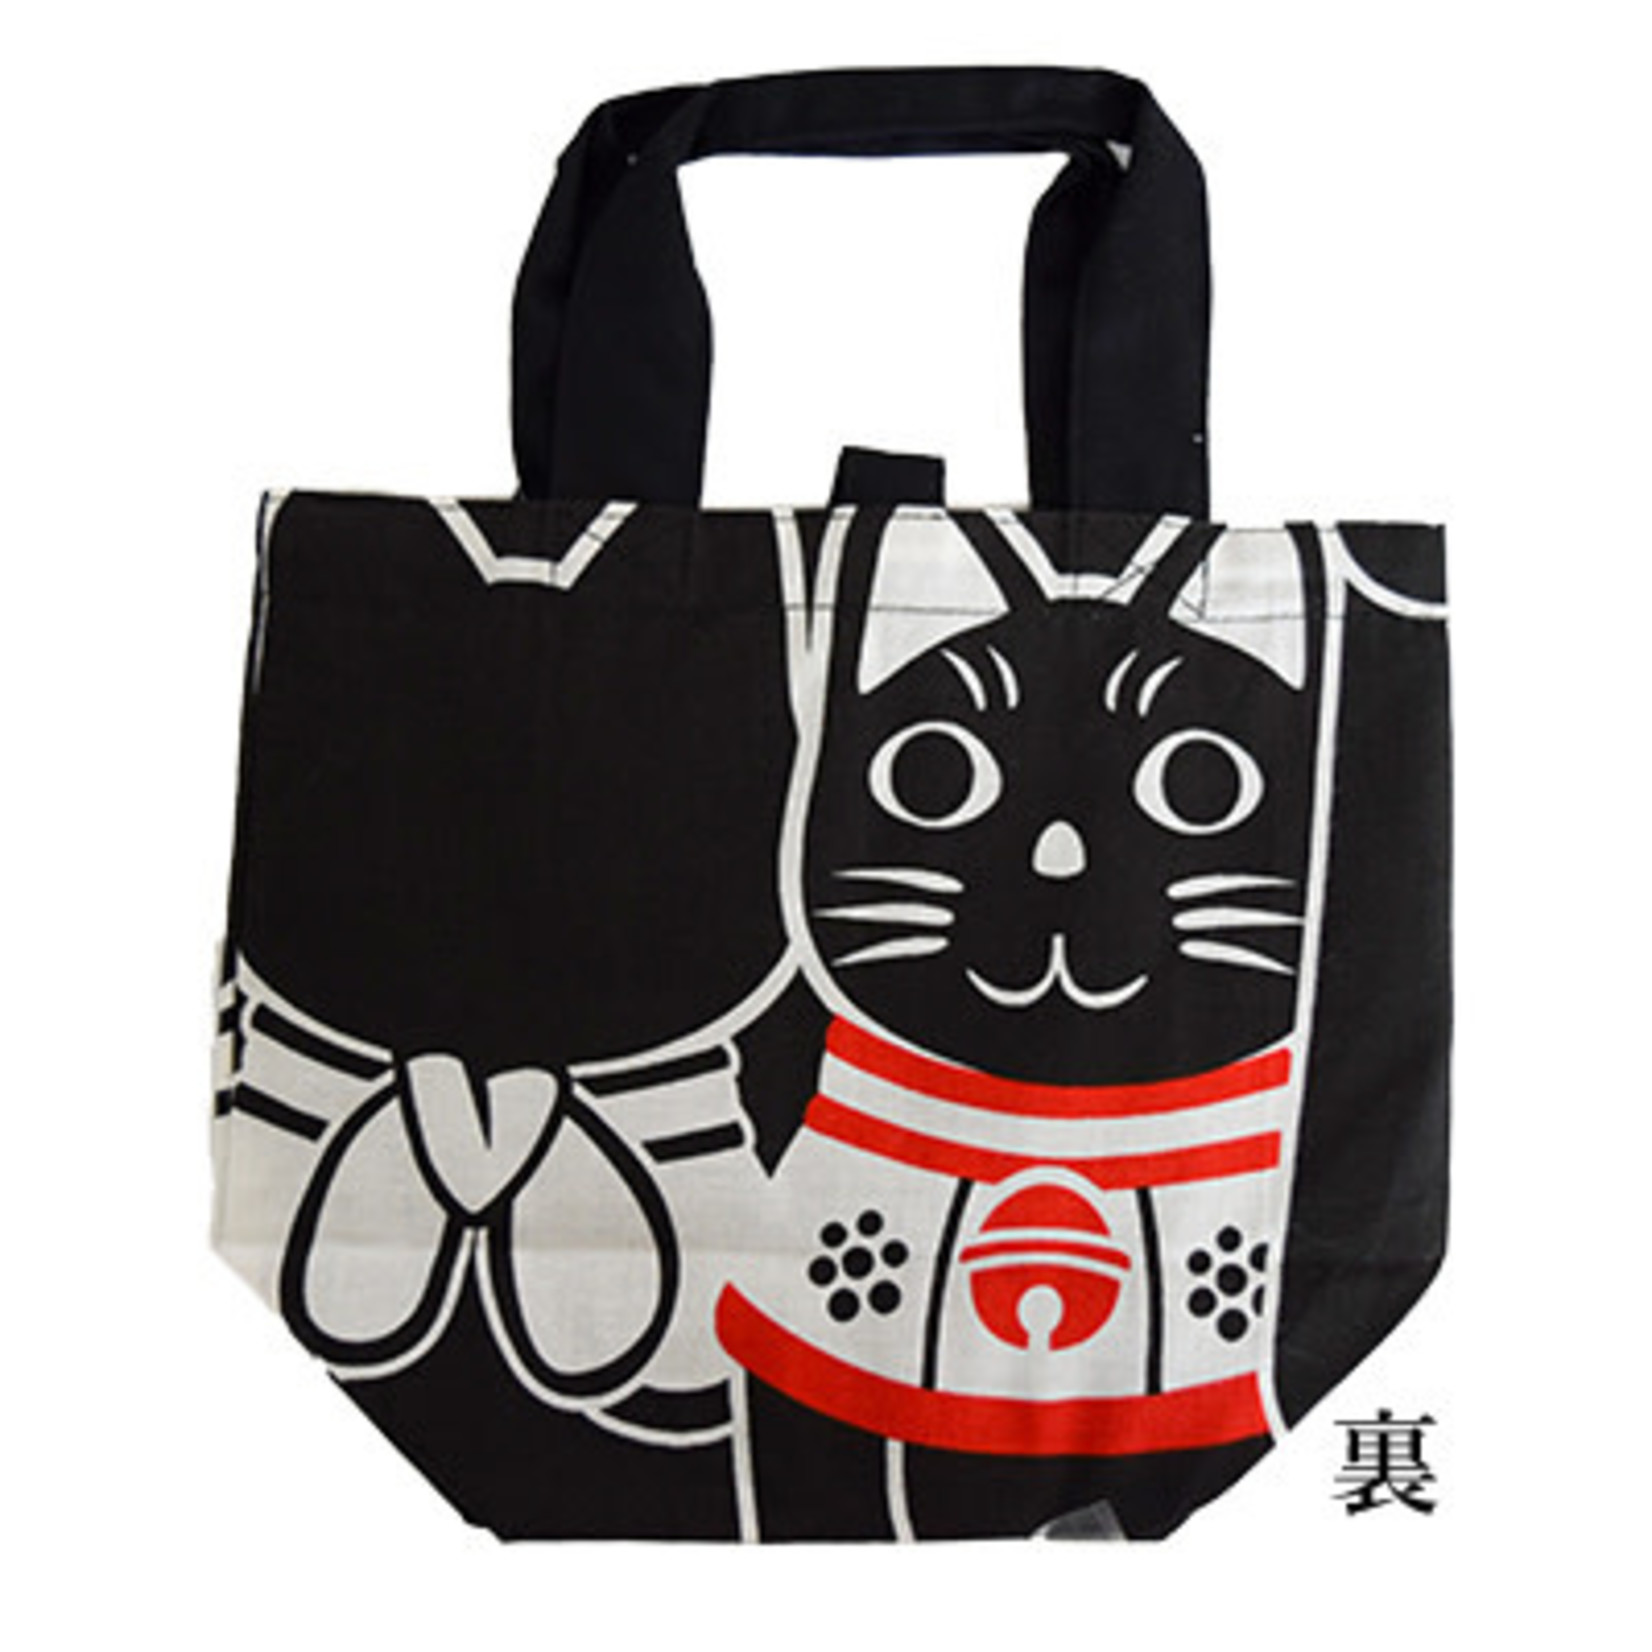 Tote Bag - Beckoning cats side by side (black)